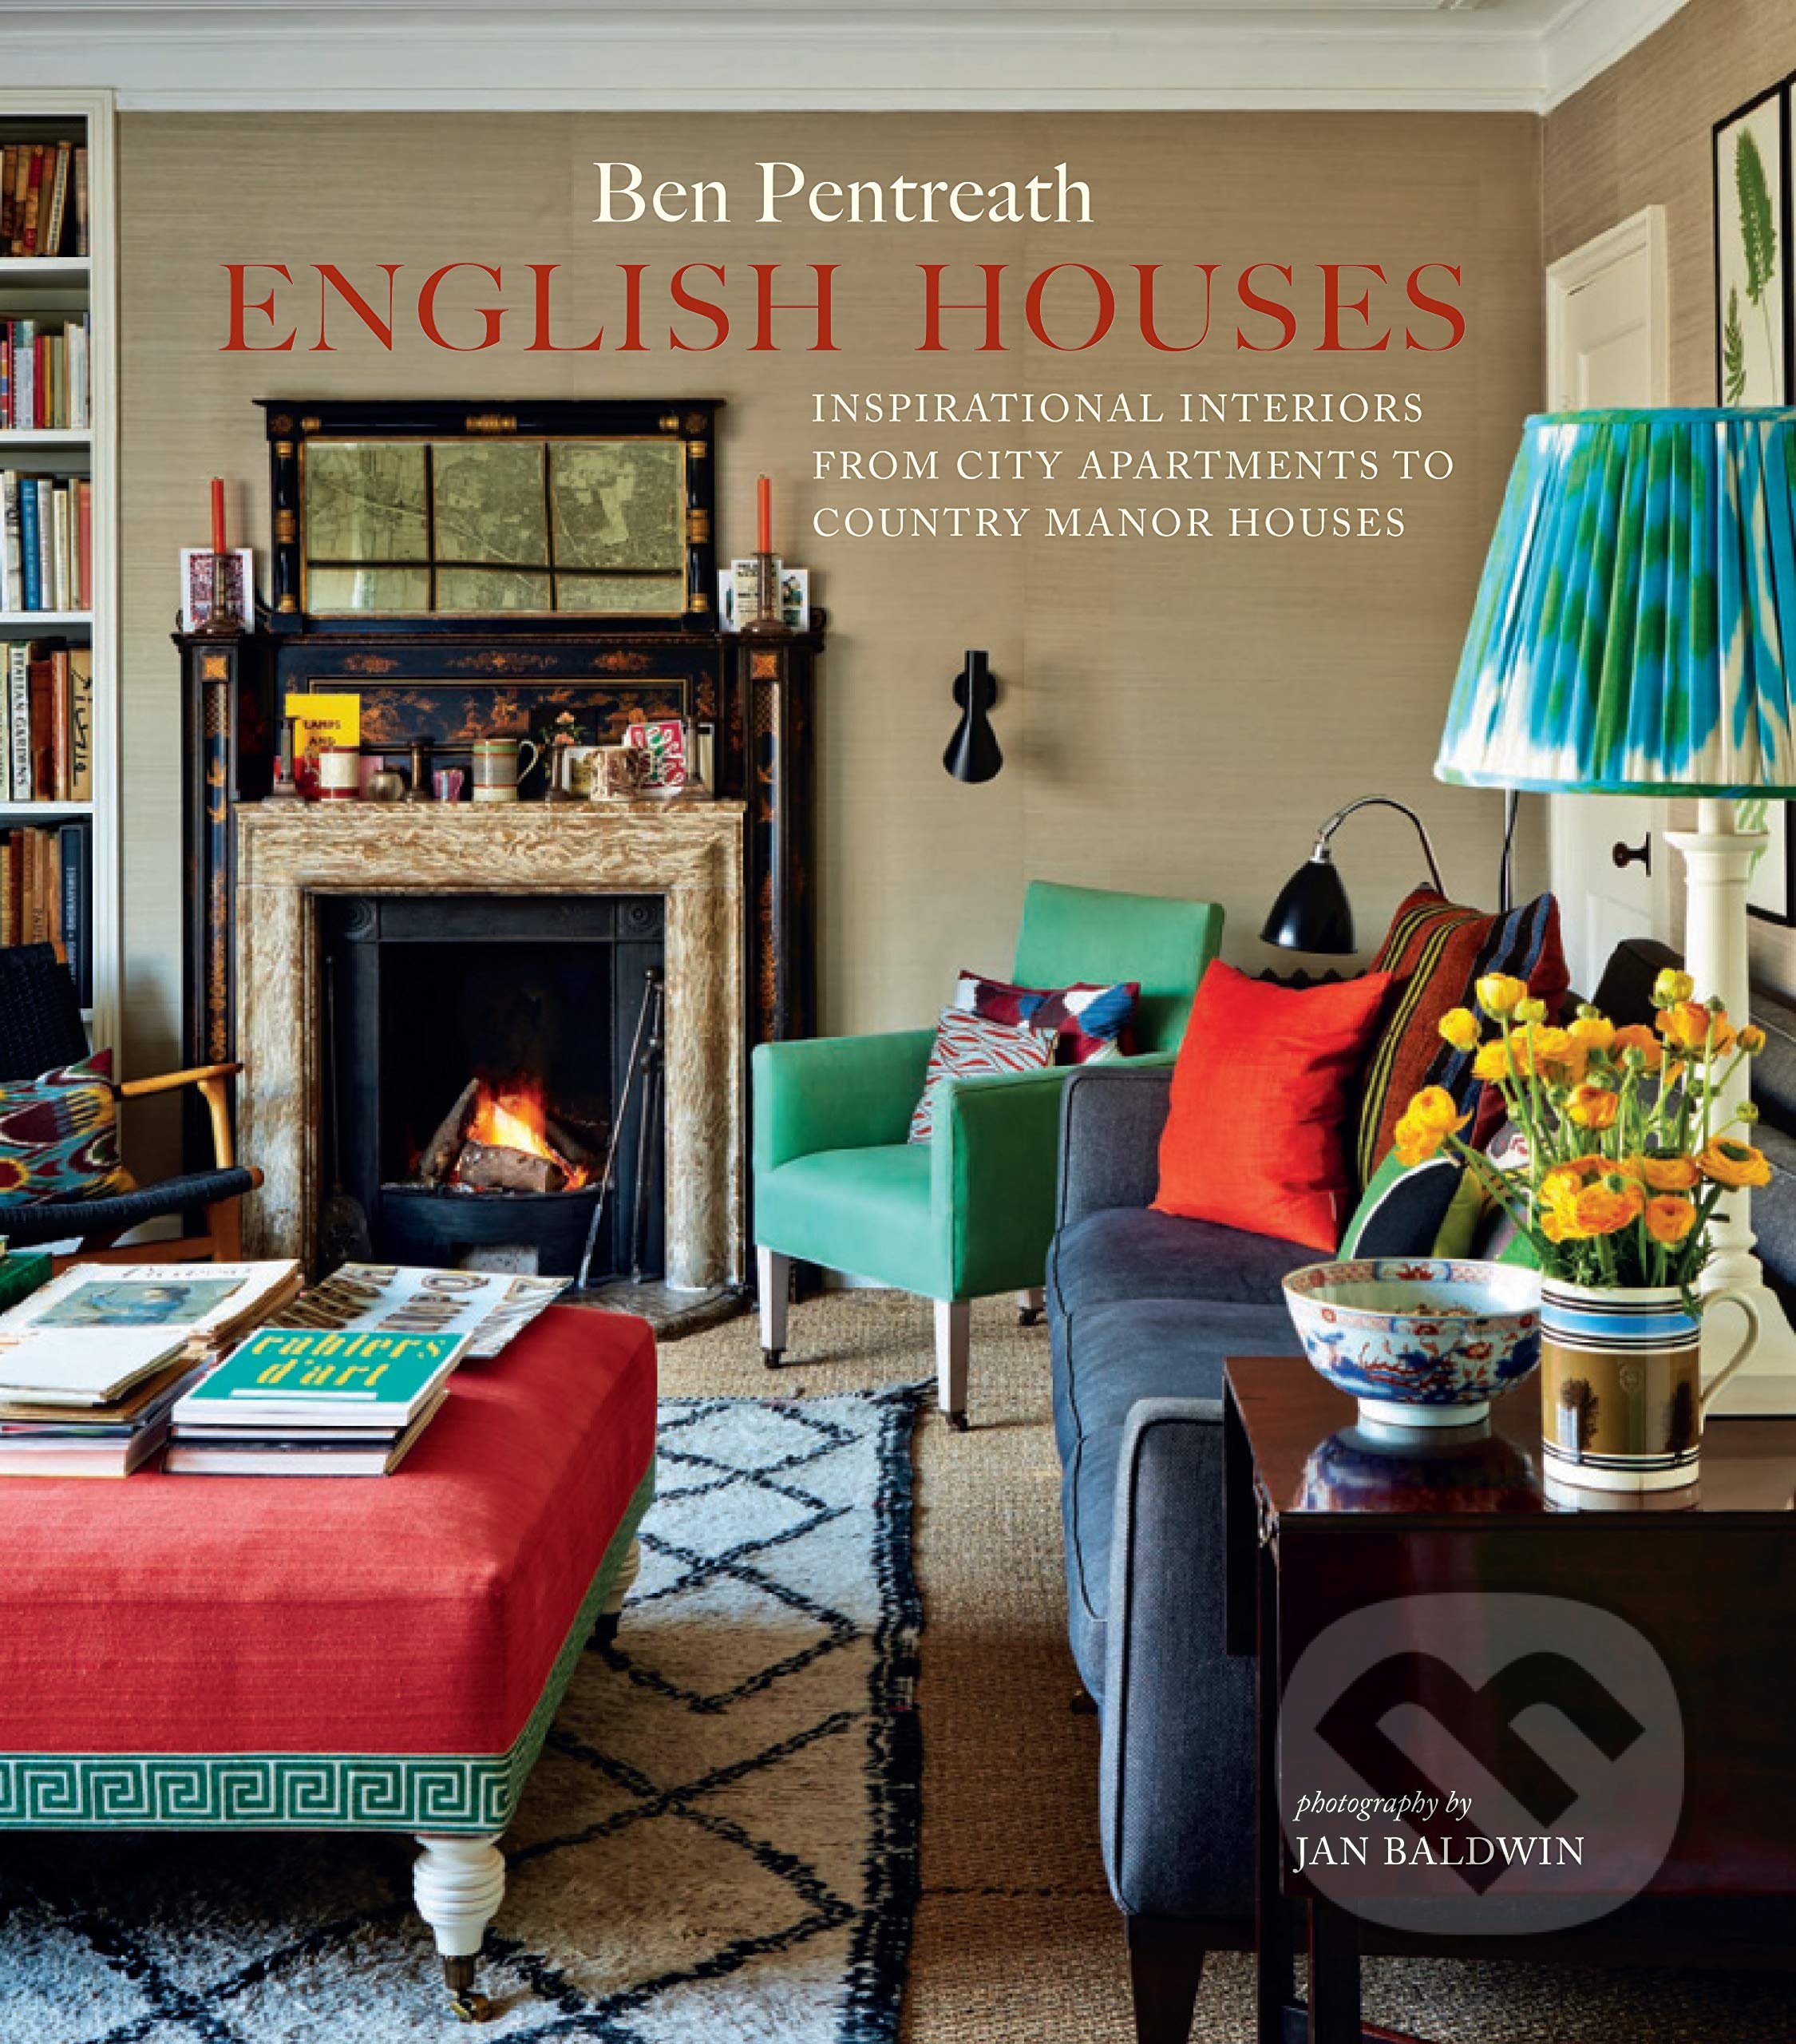 English Houses - Ben Pentreath, Ryland, Peters and Small, 2016